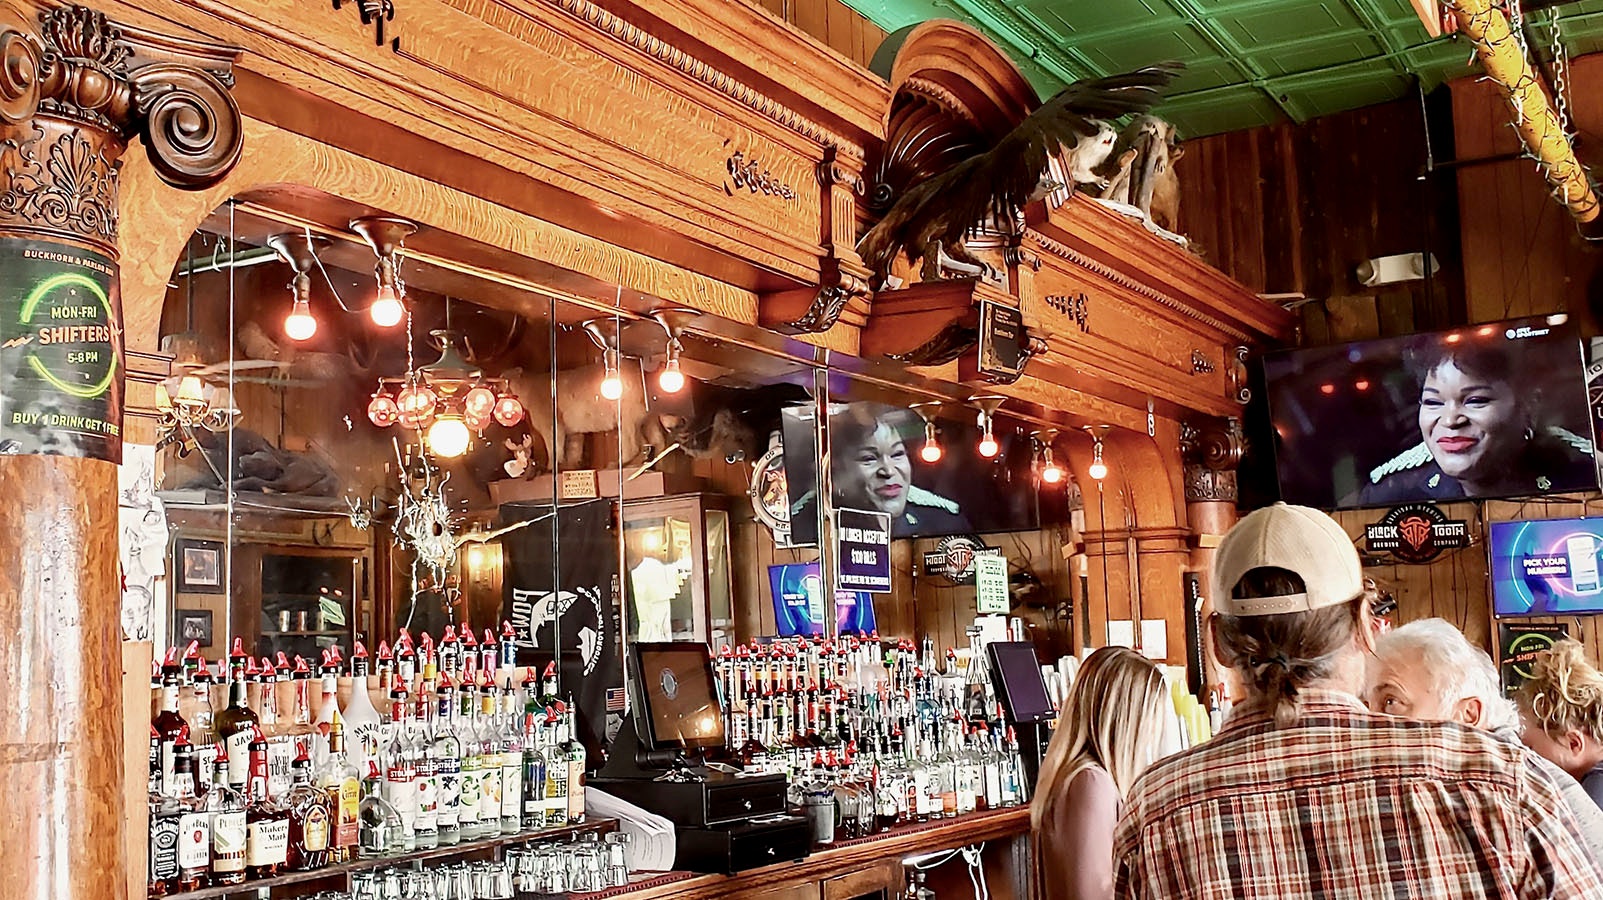 A now-legendary bullet hole to the left is still part of the iconic bar at the Buckhorn, which is listed on the National Register of Historic Places.